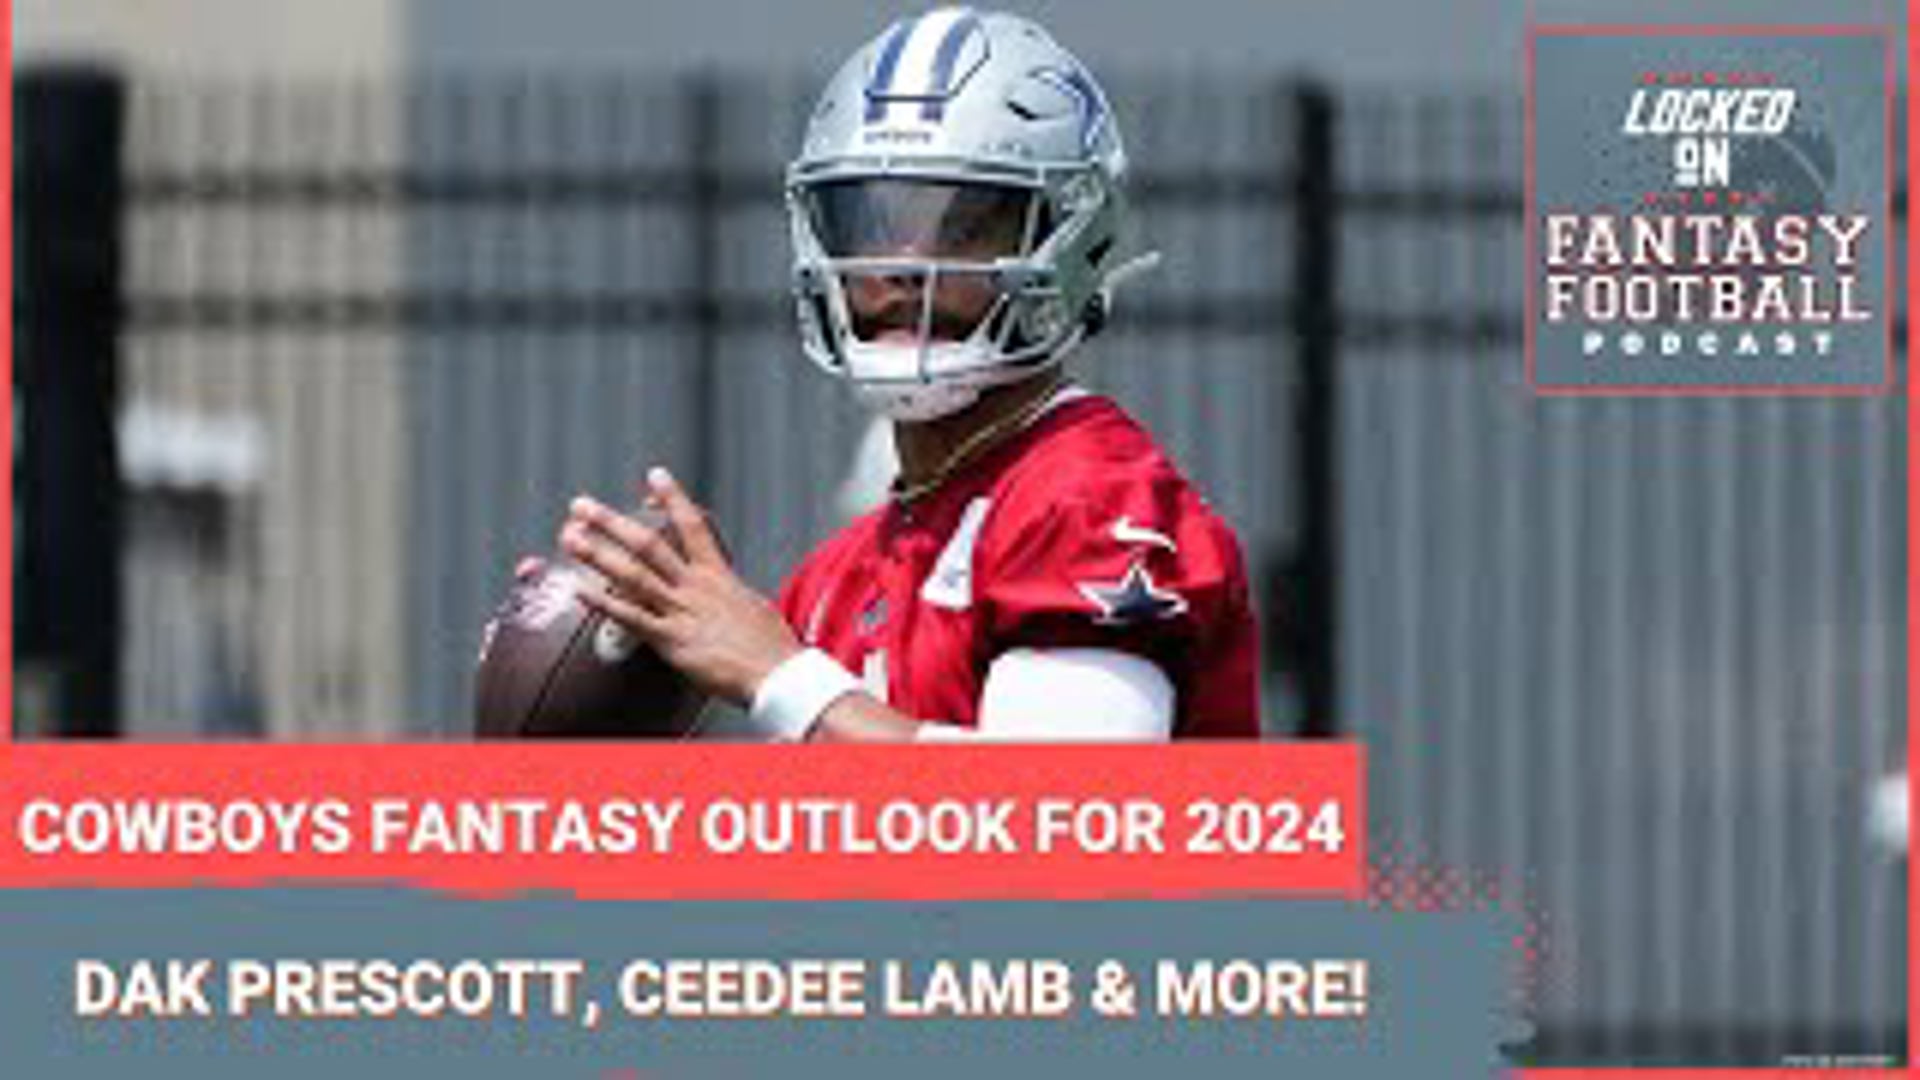 Sporting News.com's Vinnie Iyer and NFL.com's Michelle Magdziuk break down the fantasy football potential of the 2024 Dallas Cowboys.